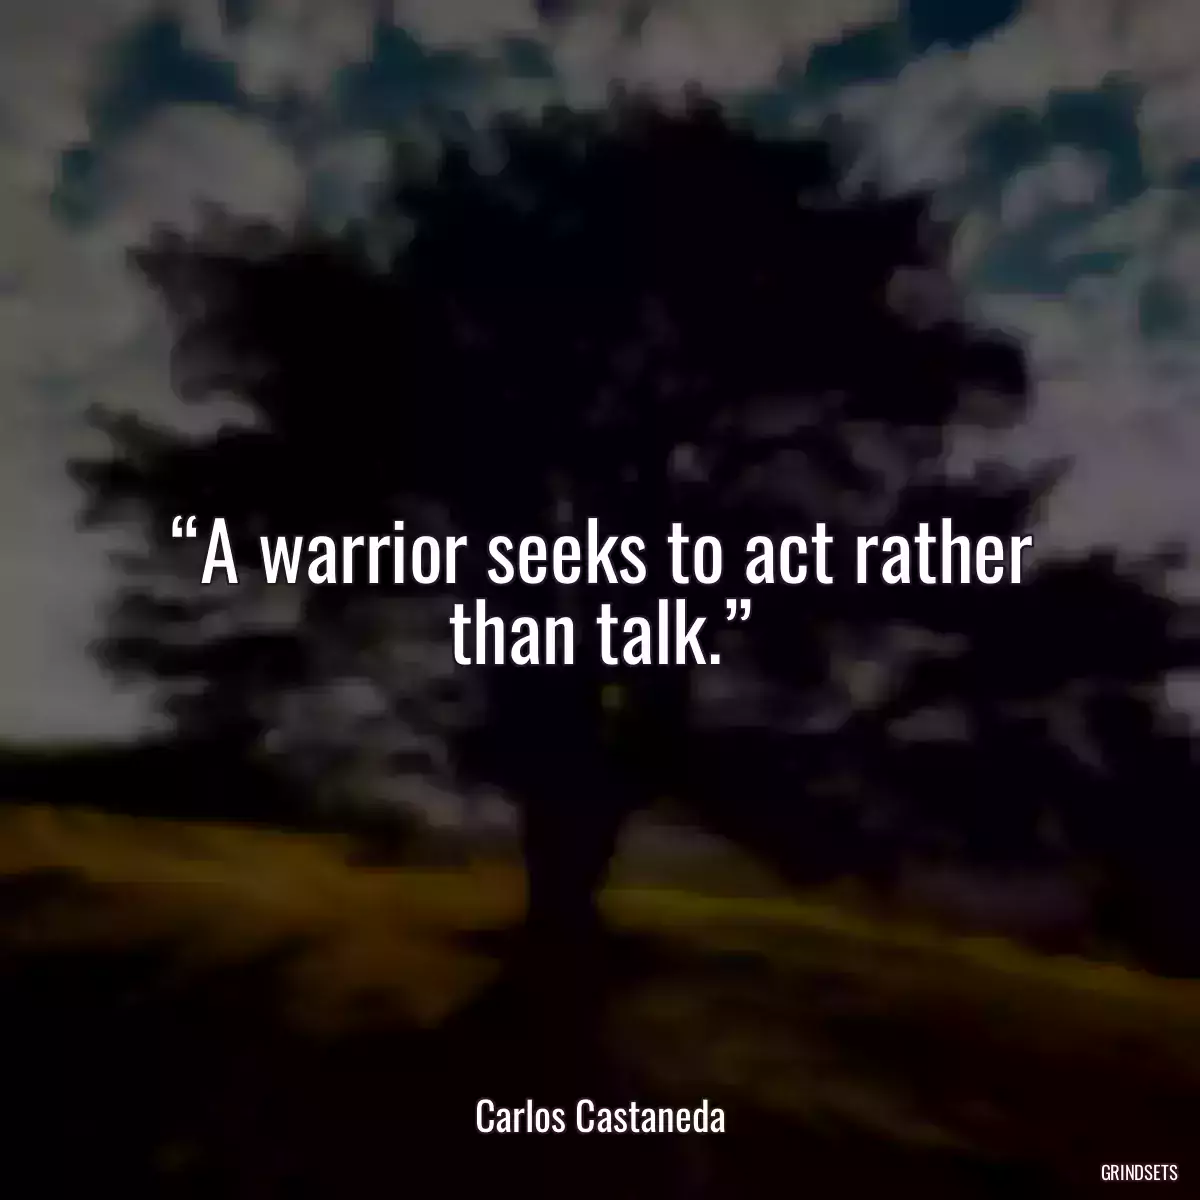 “A warrior seeks to act rather than talk.”